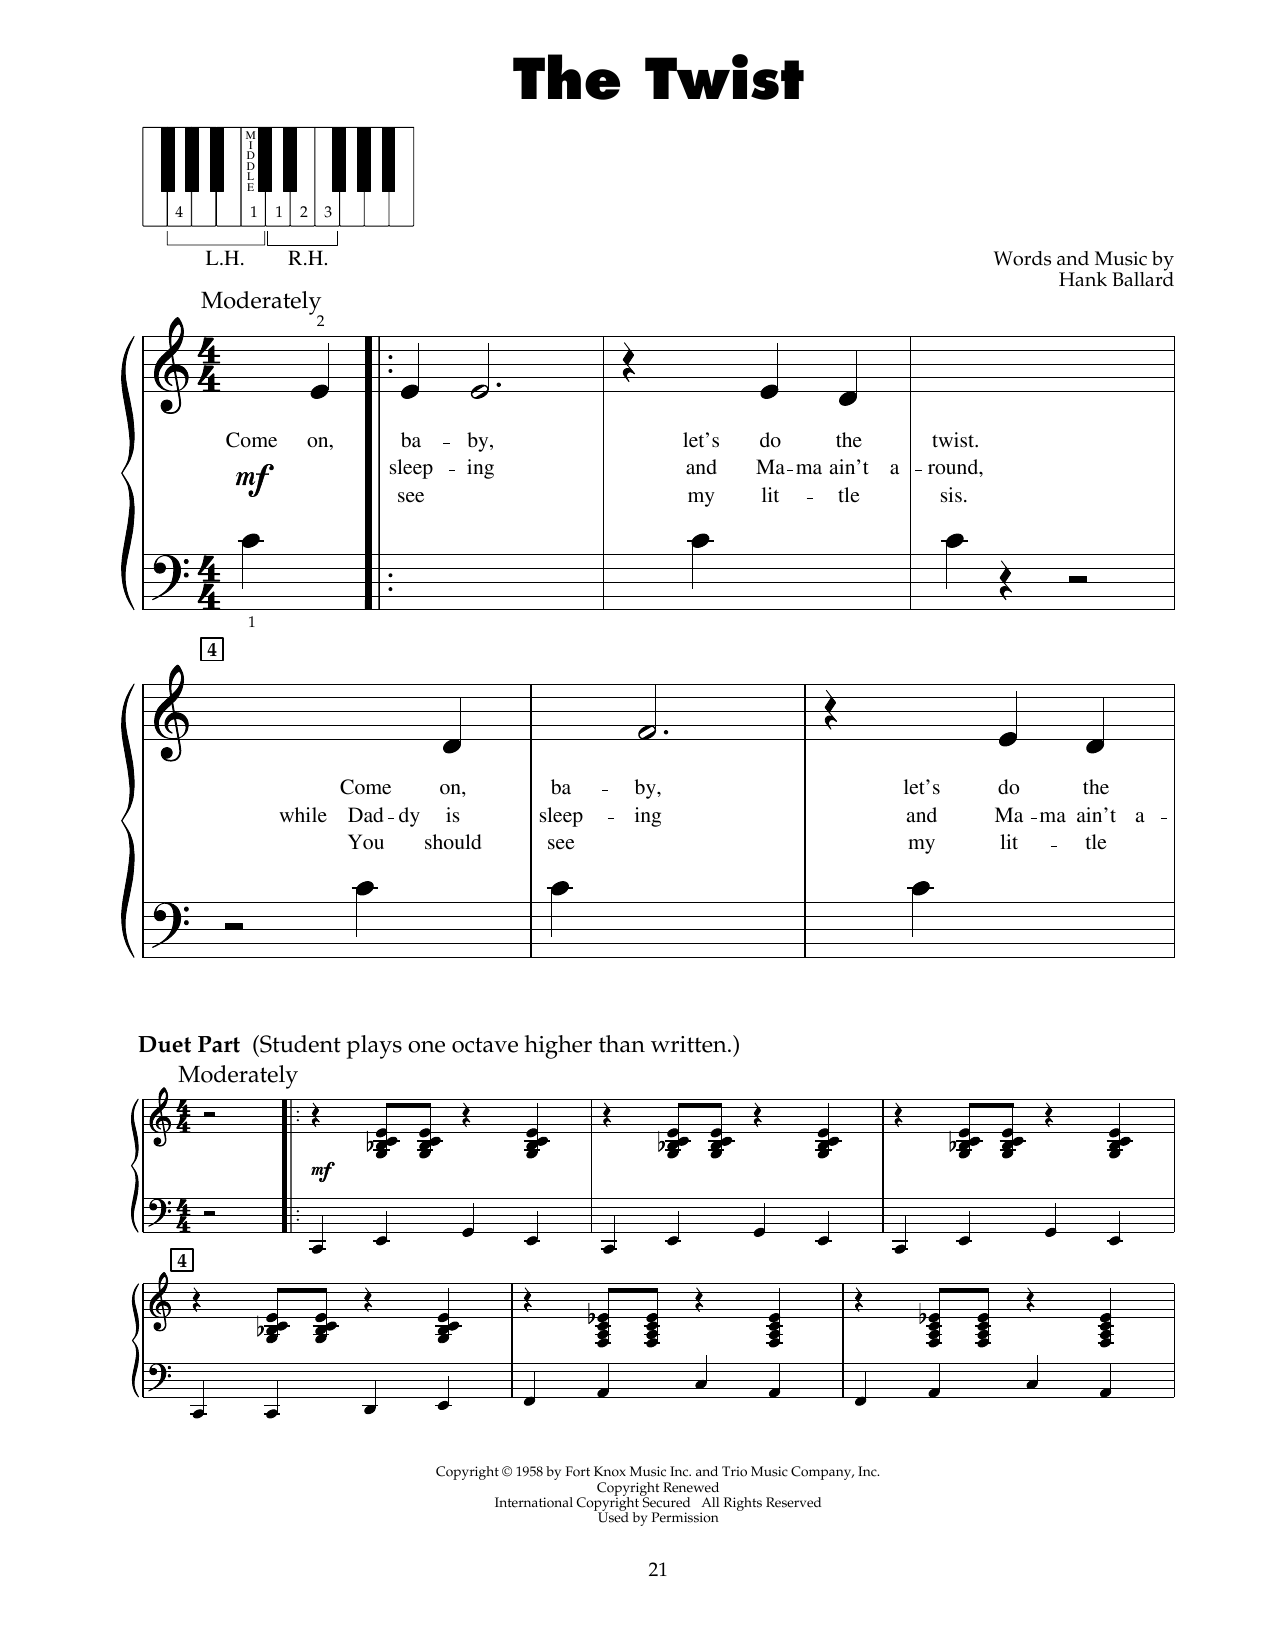 Download Chubby Checker The Twist Sheet Music